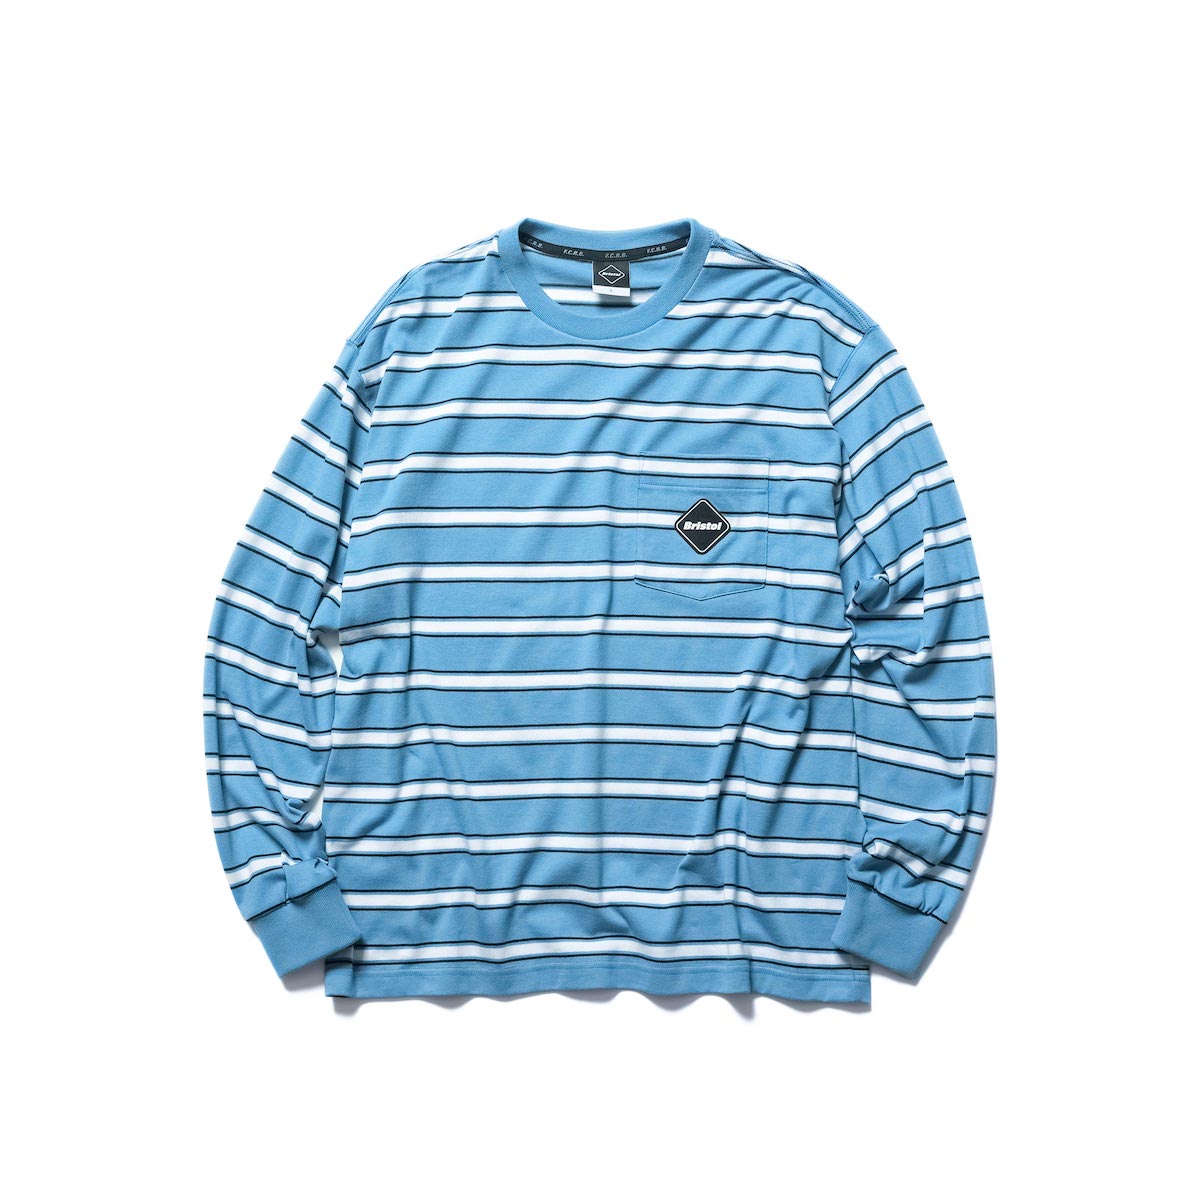 PALACE RIBBED FOR PLEASURE ボーダー柄 スウェット M